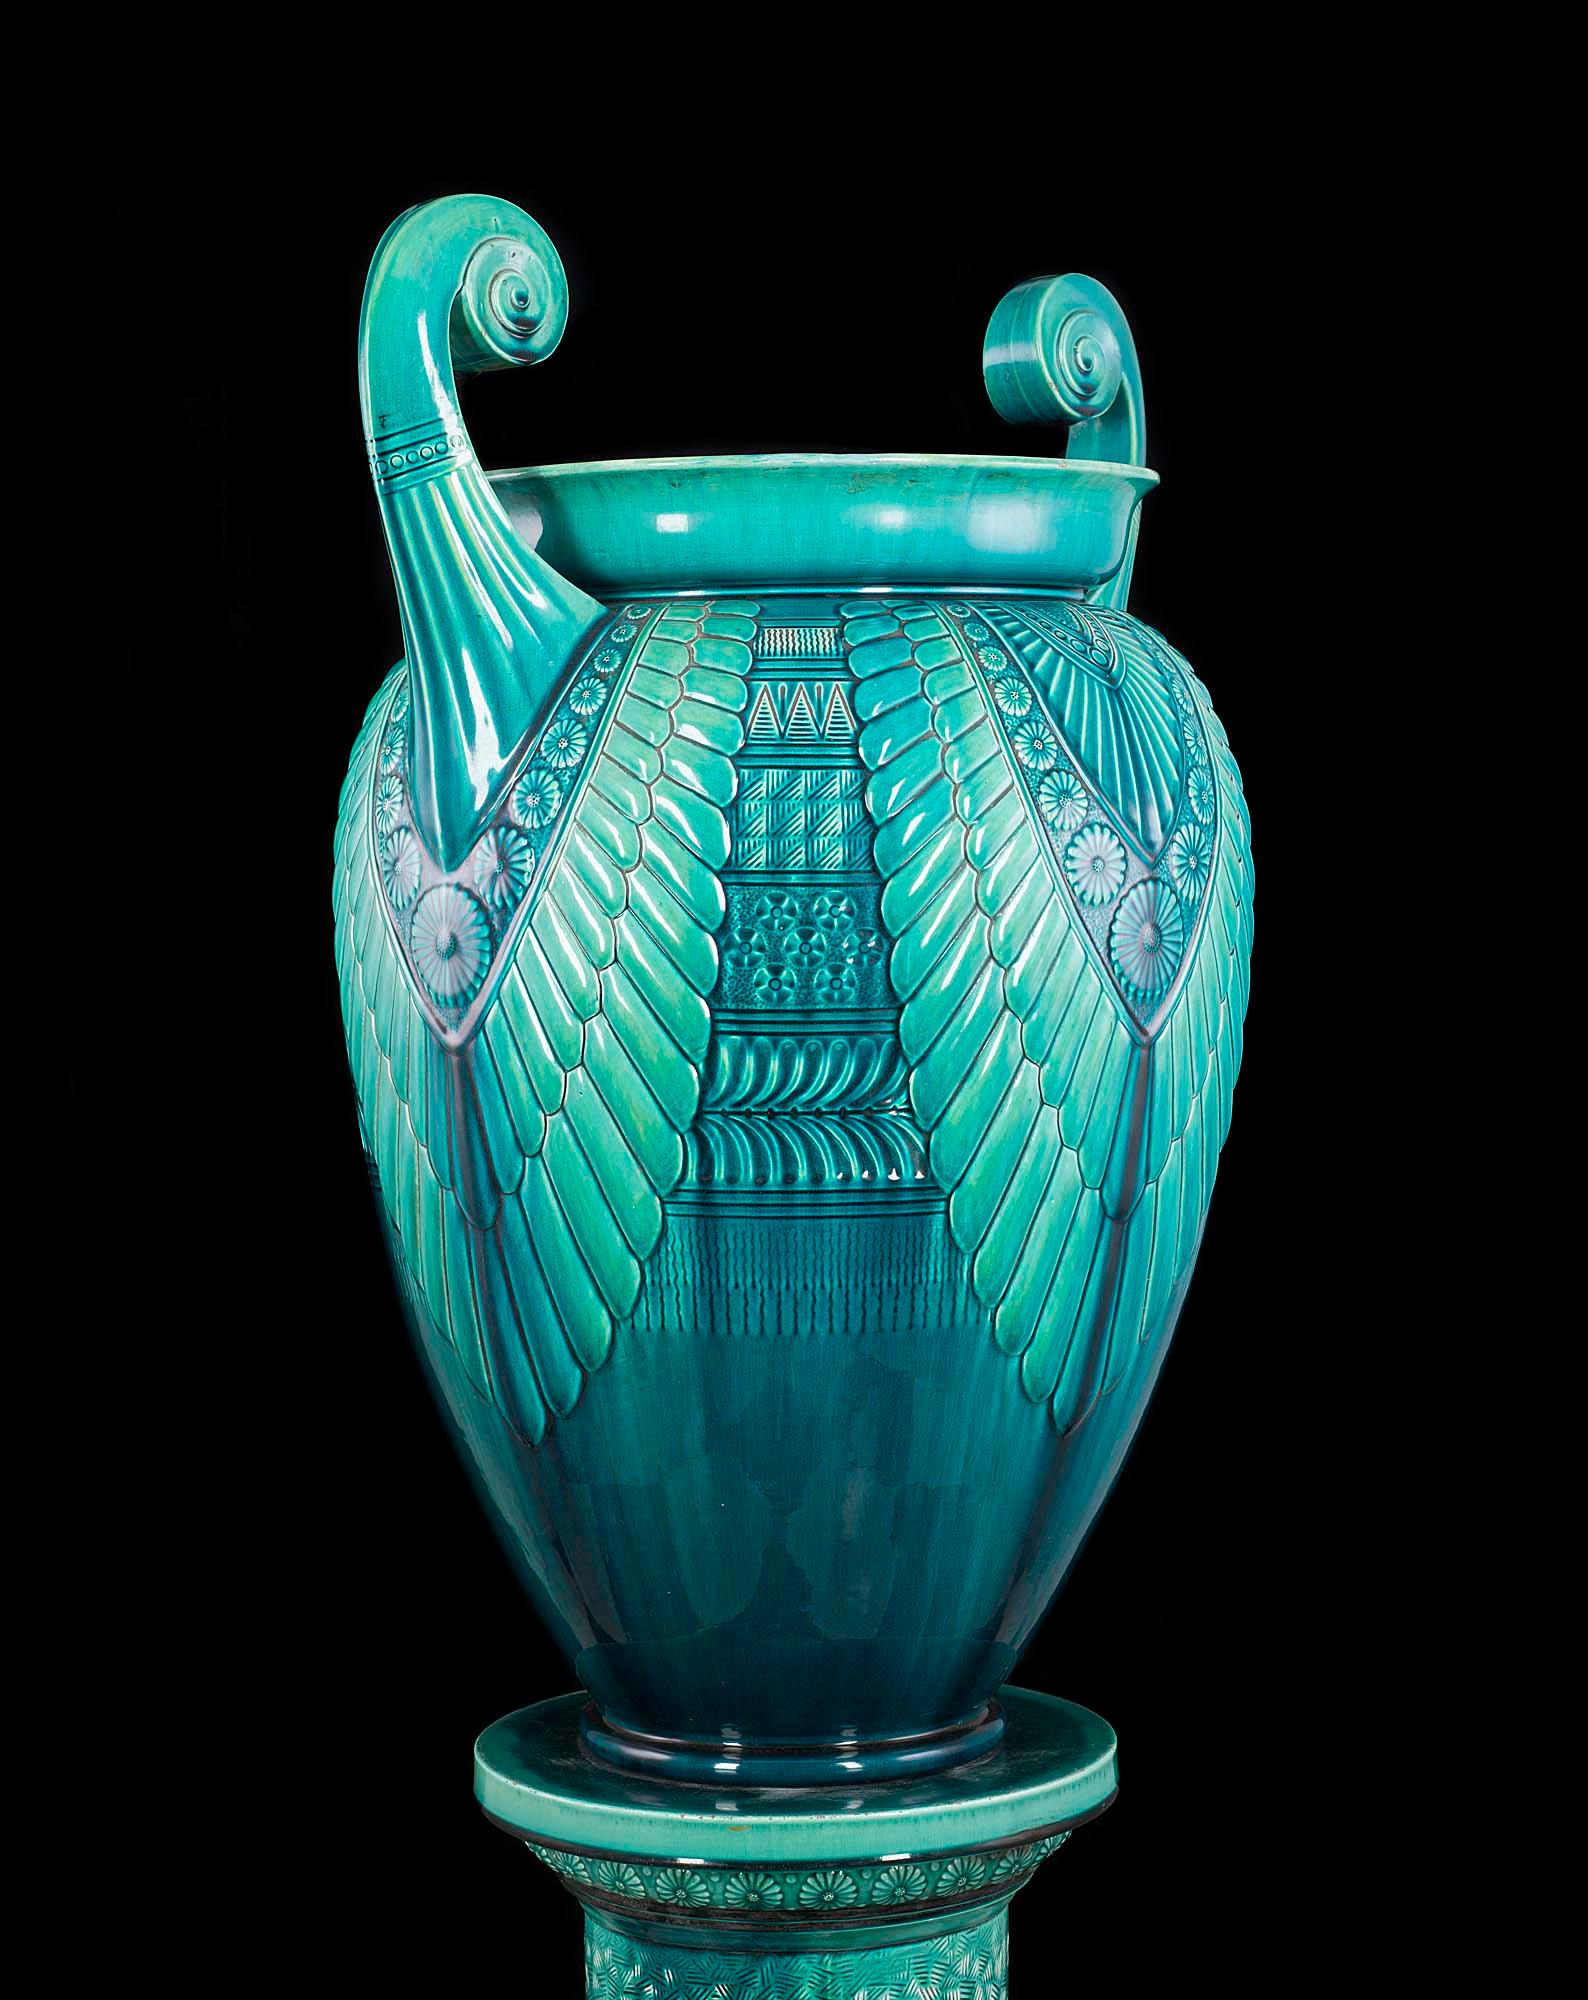 Glazed Turquoise Ceramic Jardinière and Stand Designed by Christopher Dresser 1